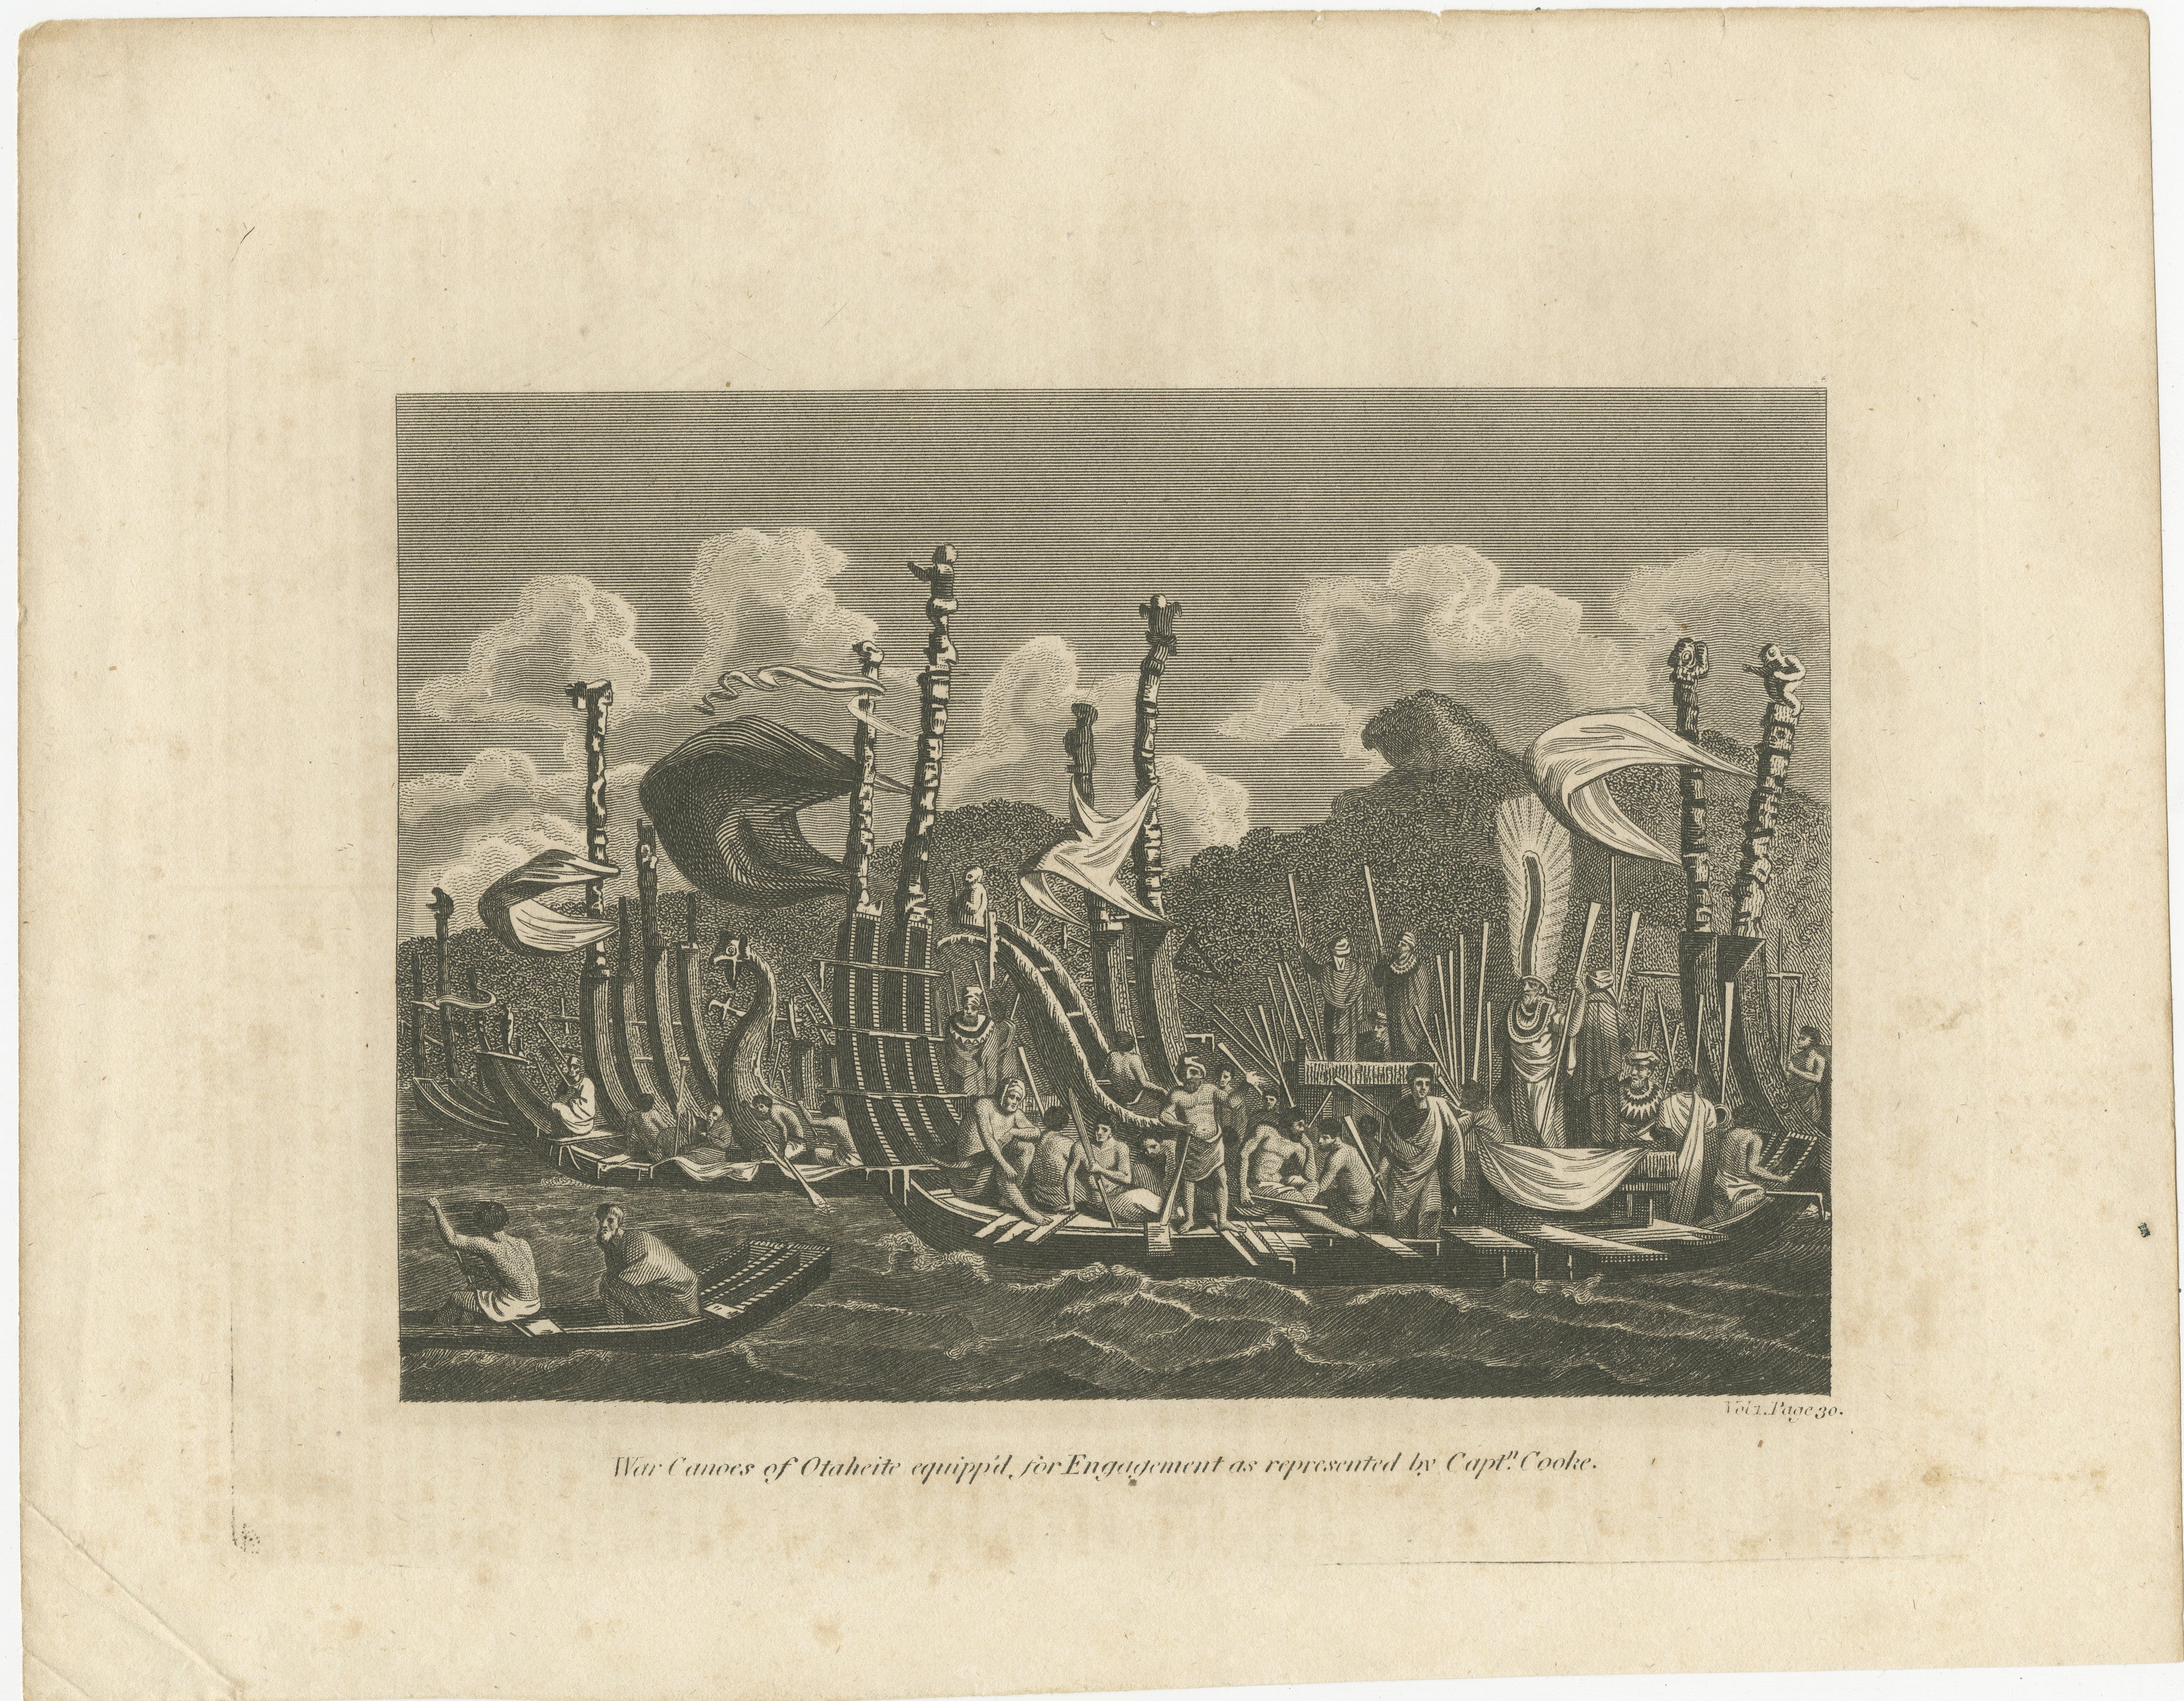 Title: War Canoes of Otaheite equipp'd for Engagement as represented by Captn. Cooke

This detailed engraving depicts the 